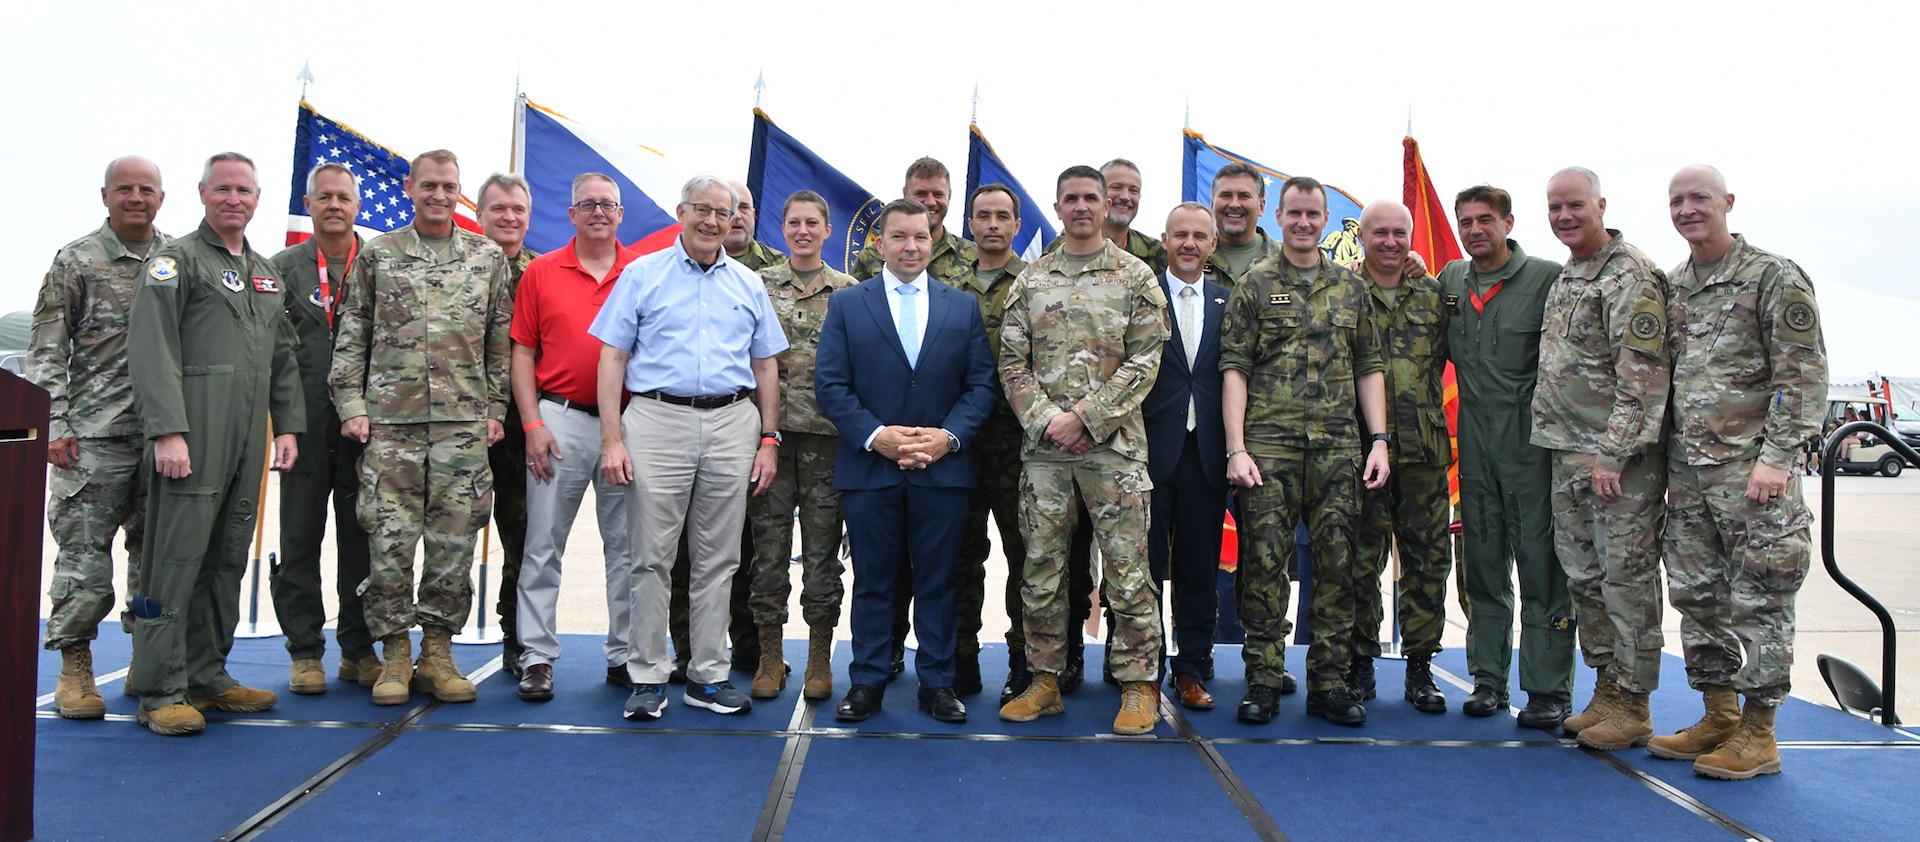 Members of the Czech delegation pose for a photo with senior leaders of the Nebraska and Texas National Guard following an Aug. 26, 2023, ceremony marking the 30th Anniversary of an enduring partnership made possible through the National Guard's State Partnership Program.